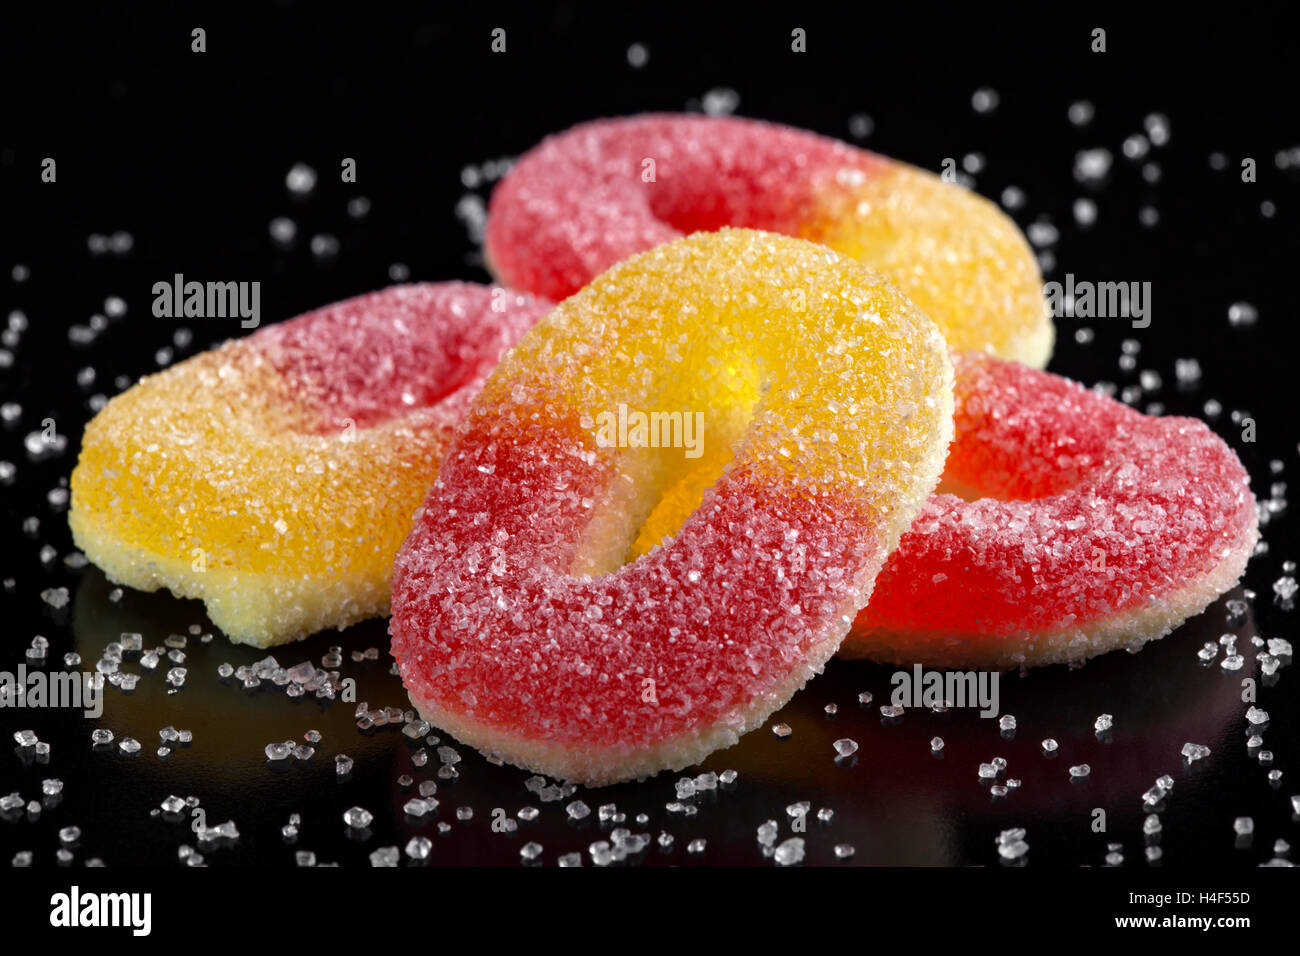 Jelly candies with white sugar over black background Stock Photo